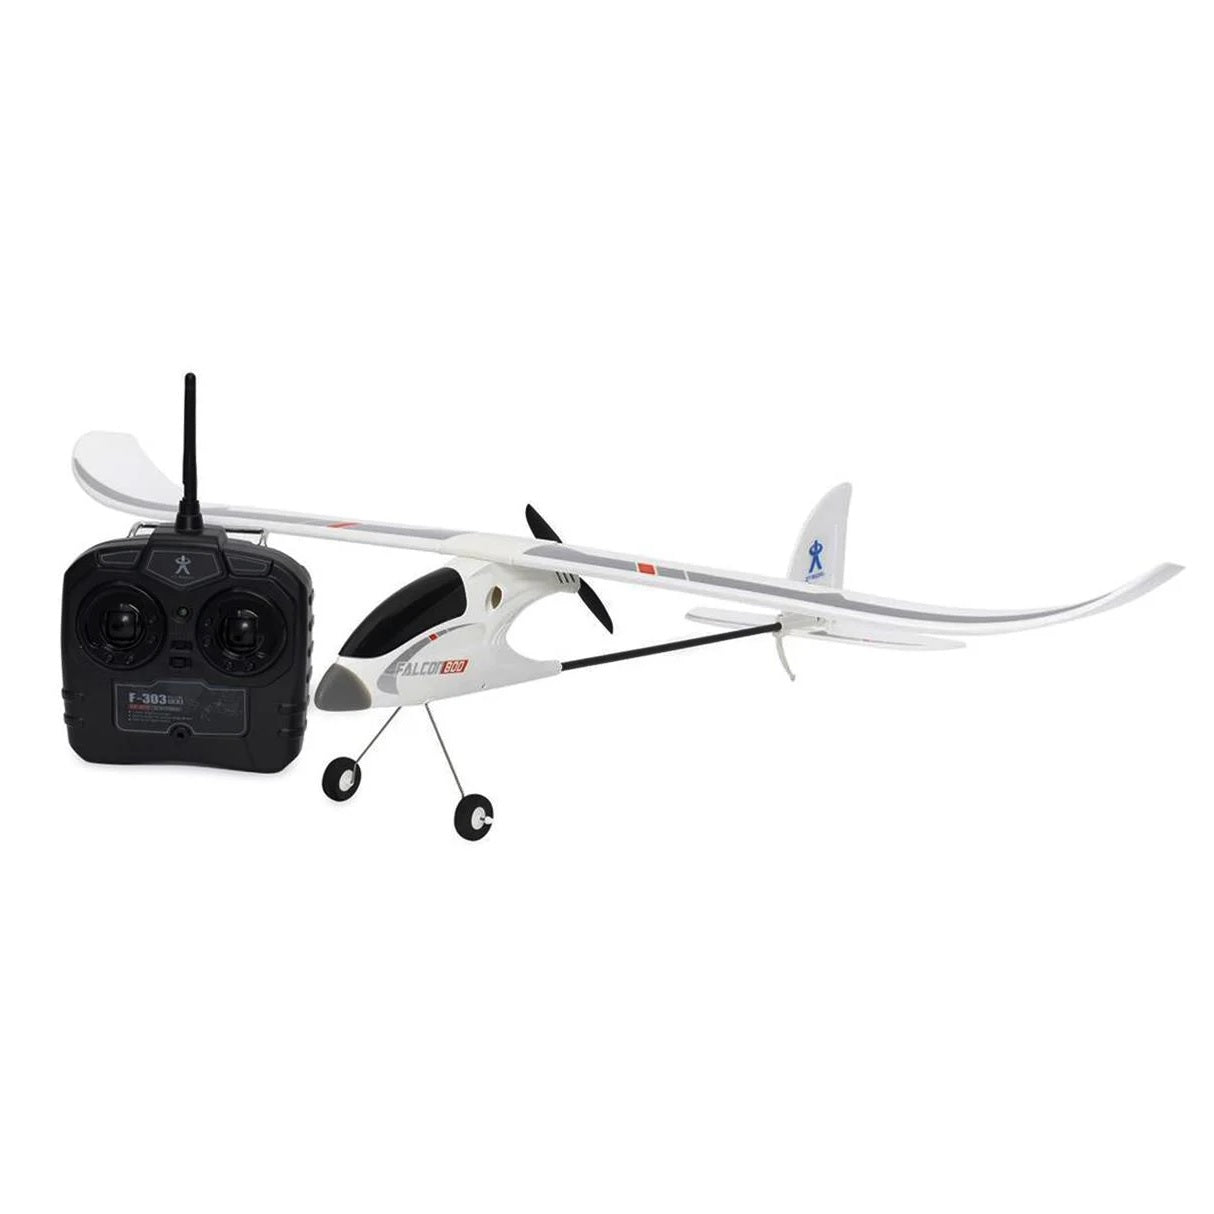 PlaySTEM Falcon 800 2.4GHz RC Plane - Micro - Mark Remote Control Airships & Blimps